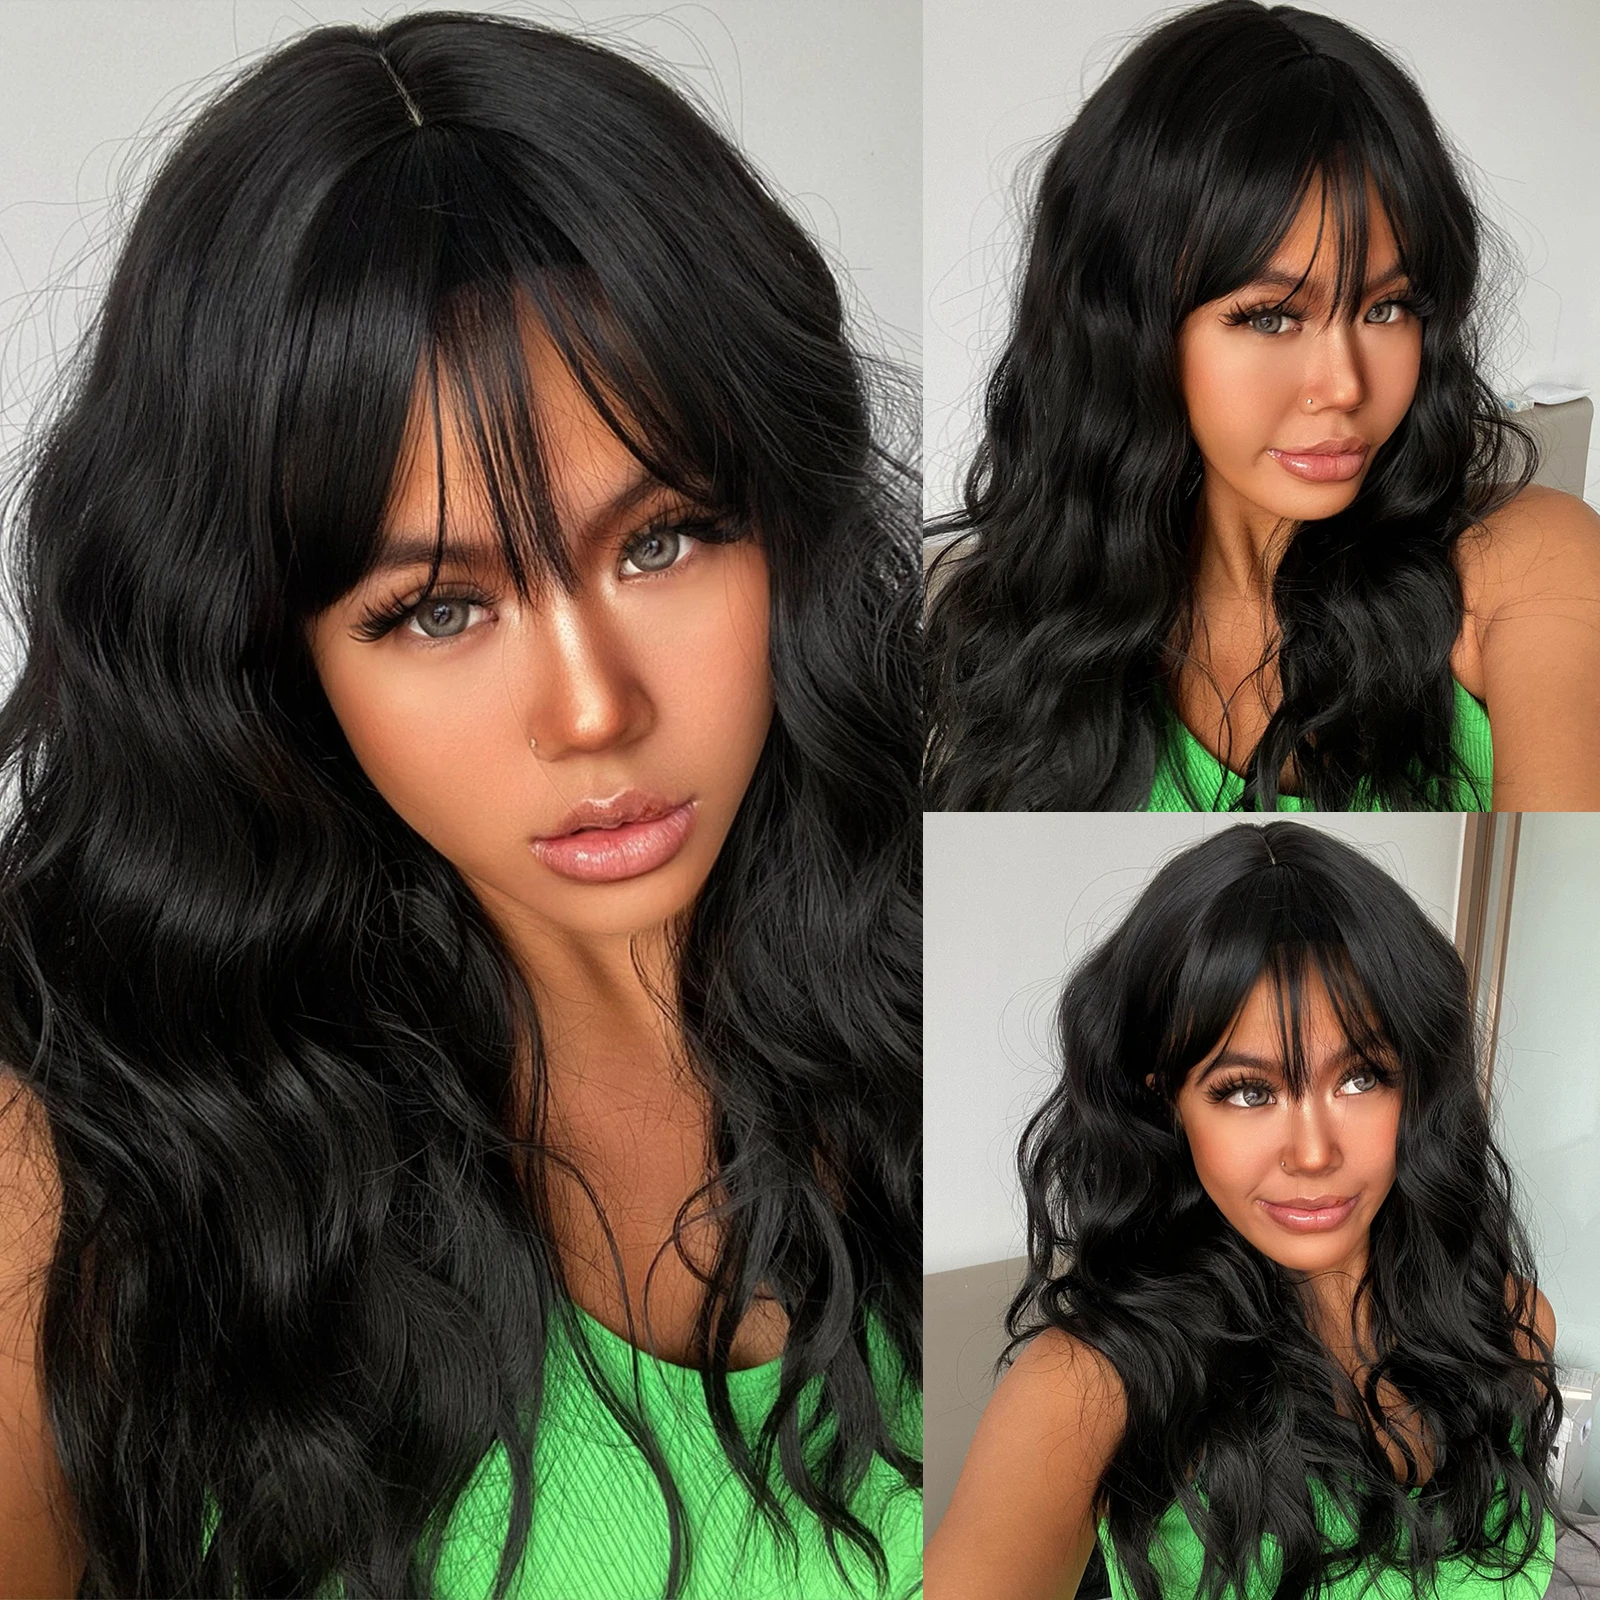 EASIHAIR Black Synthetic Wig with Bangs Long Black Water Wavy Wigs for Women Natural Hair Heat Resistant Girls Daily Party Use